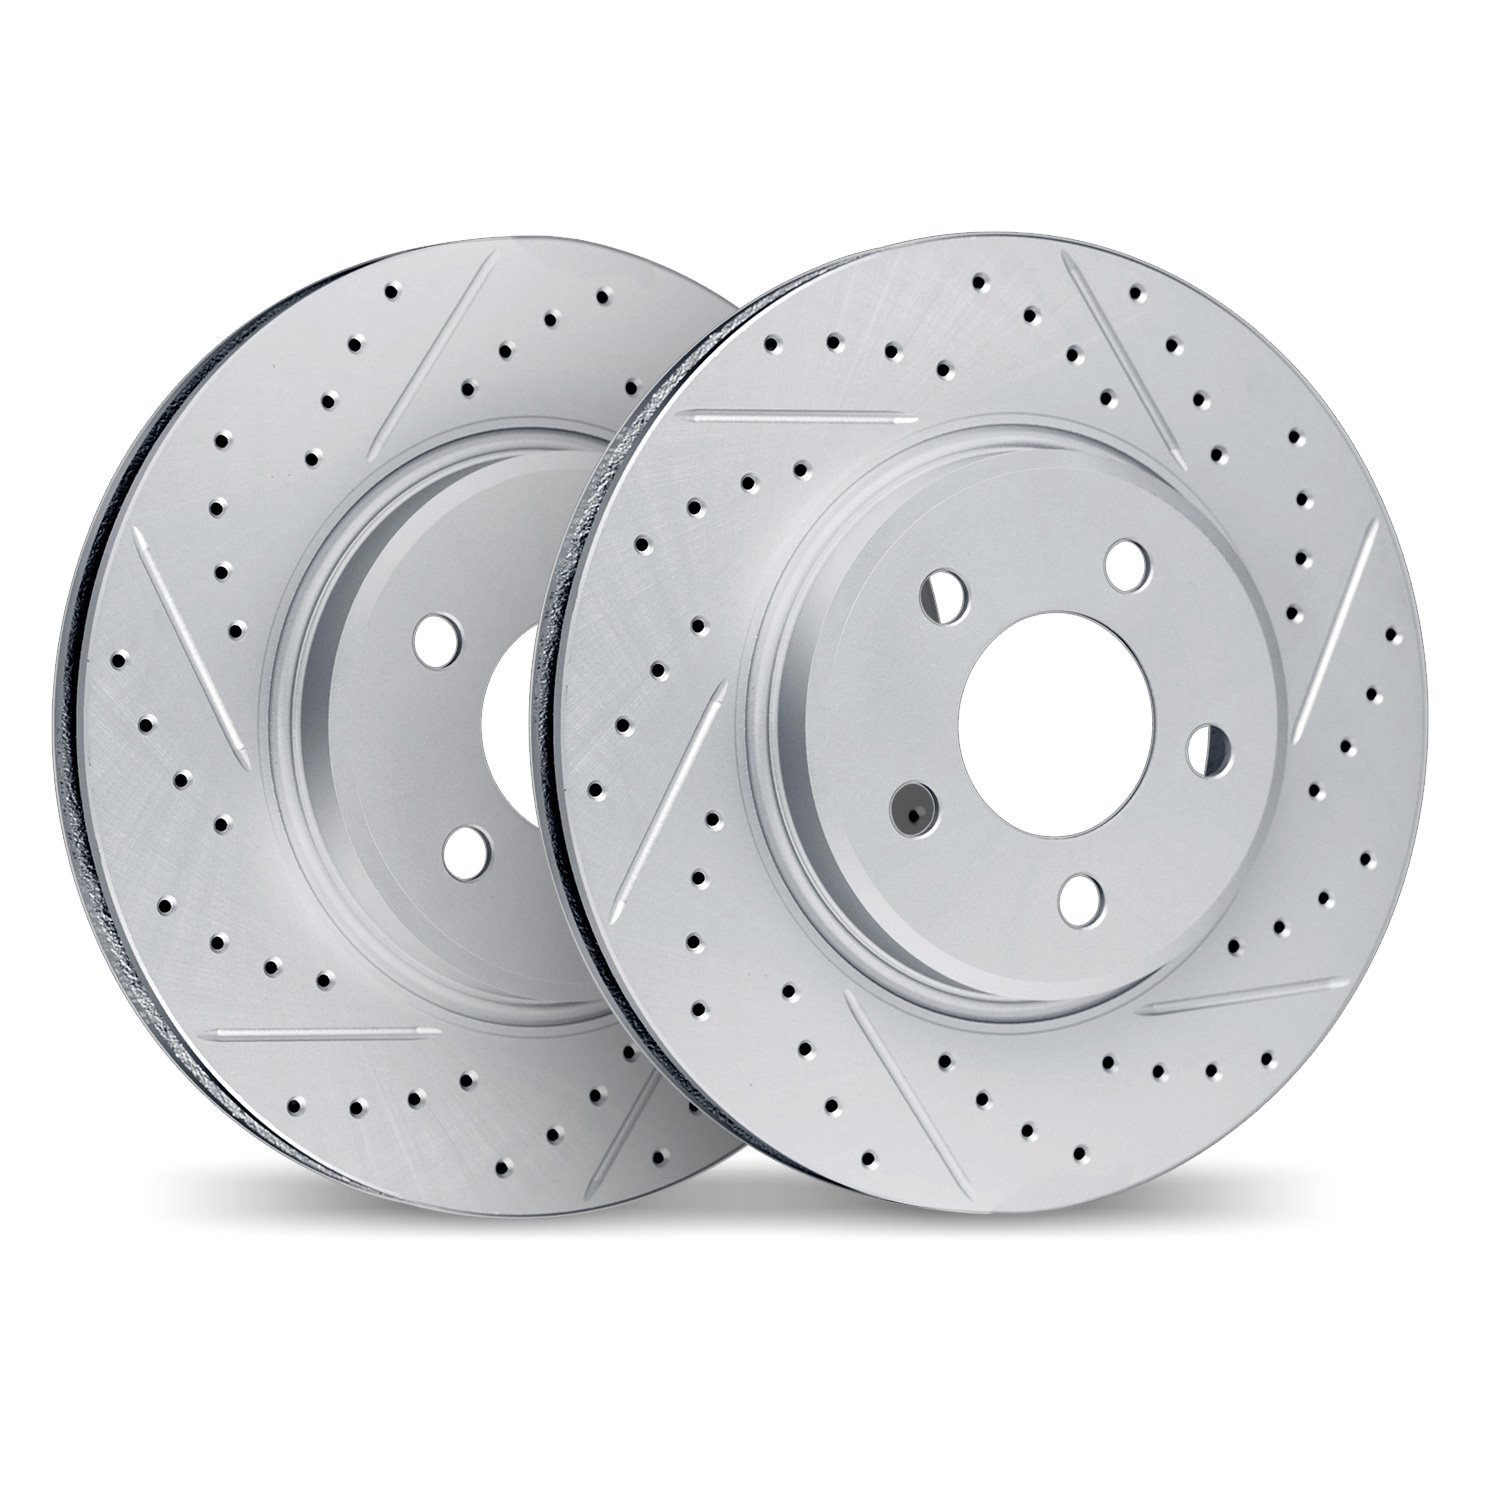 2002-75010 Geoperformance Drilled/Slotted Brake Rotors, 2001-2006 Lexus/Toyota/Scion, Position: Front